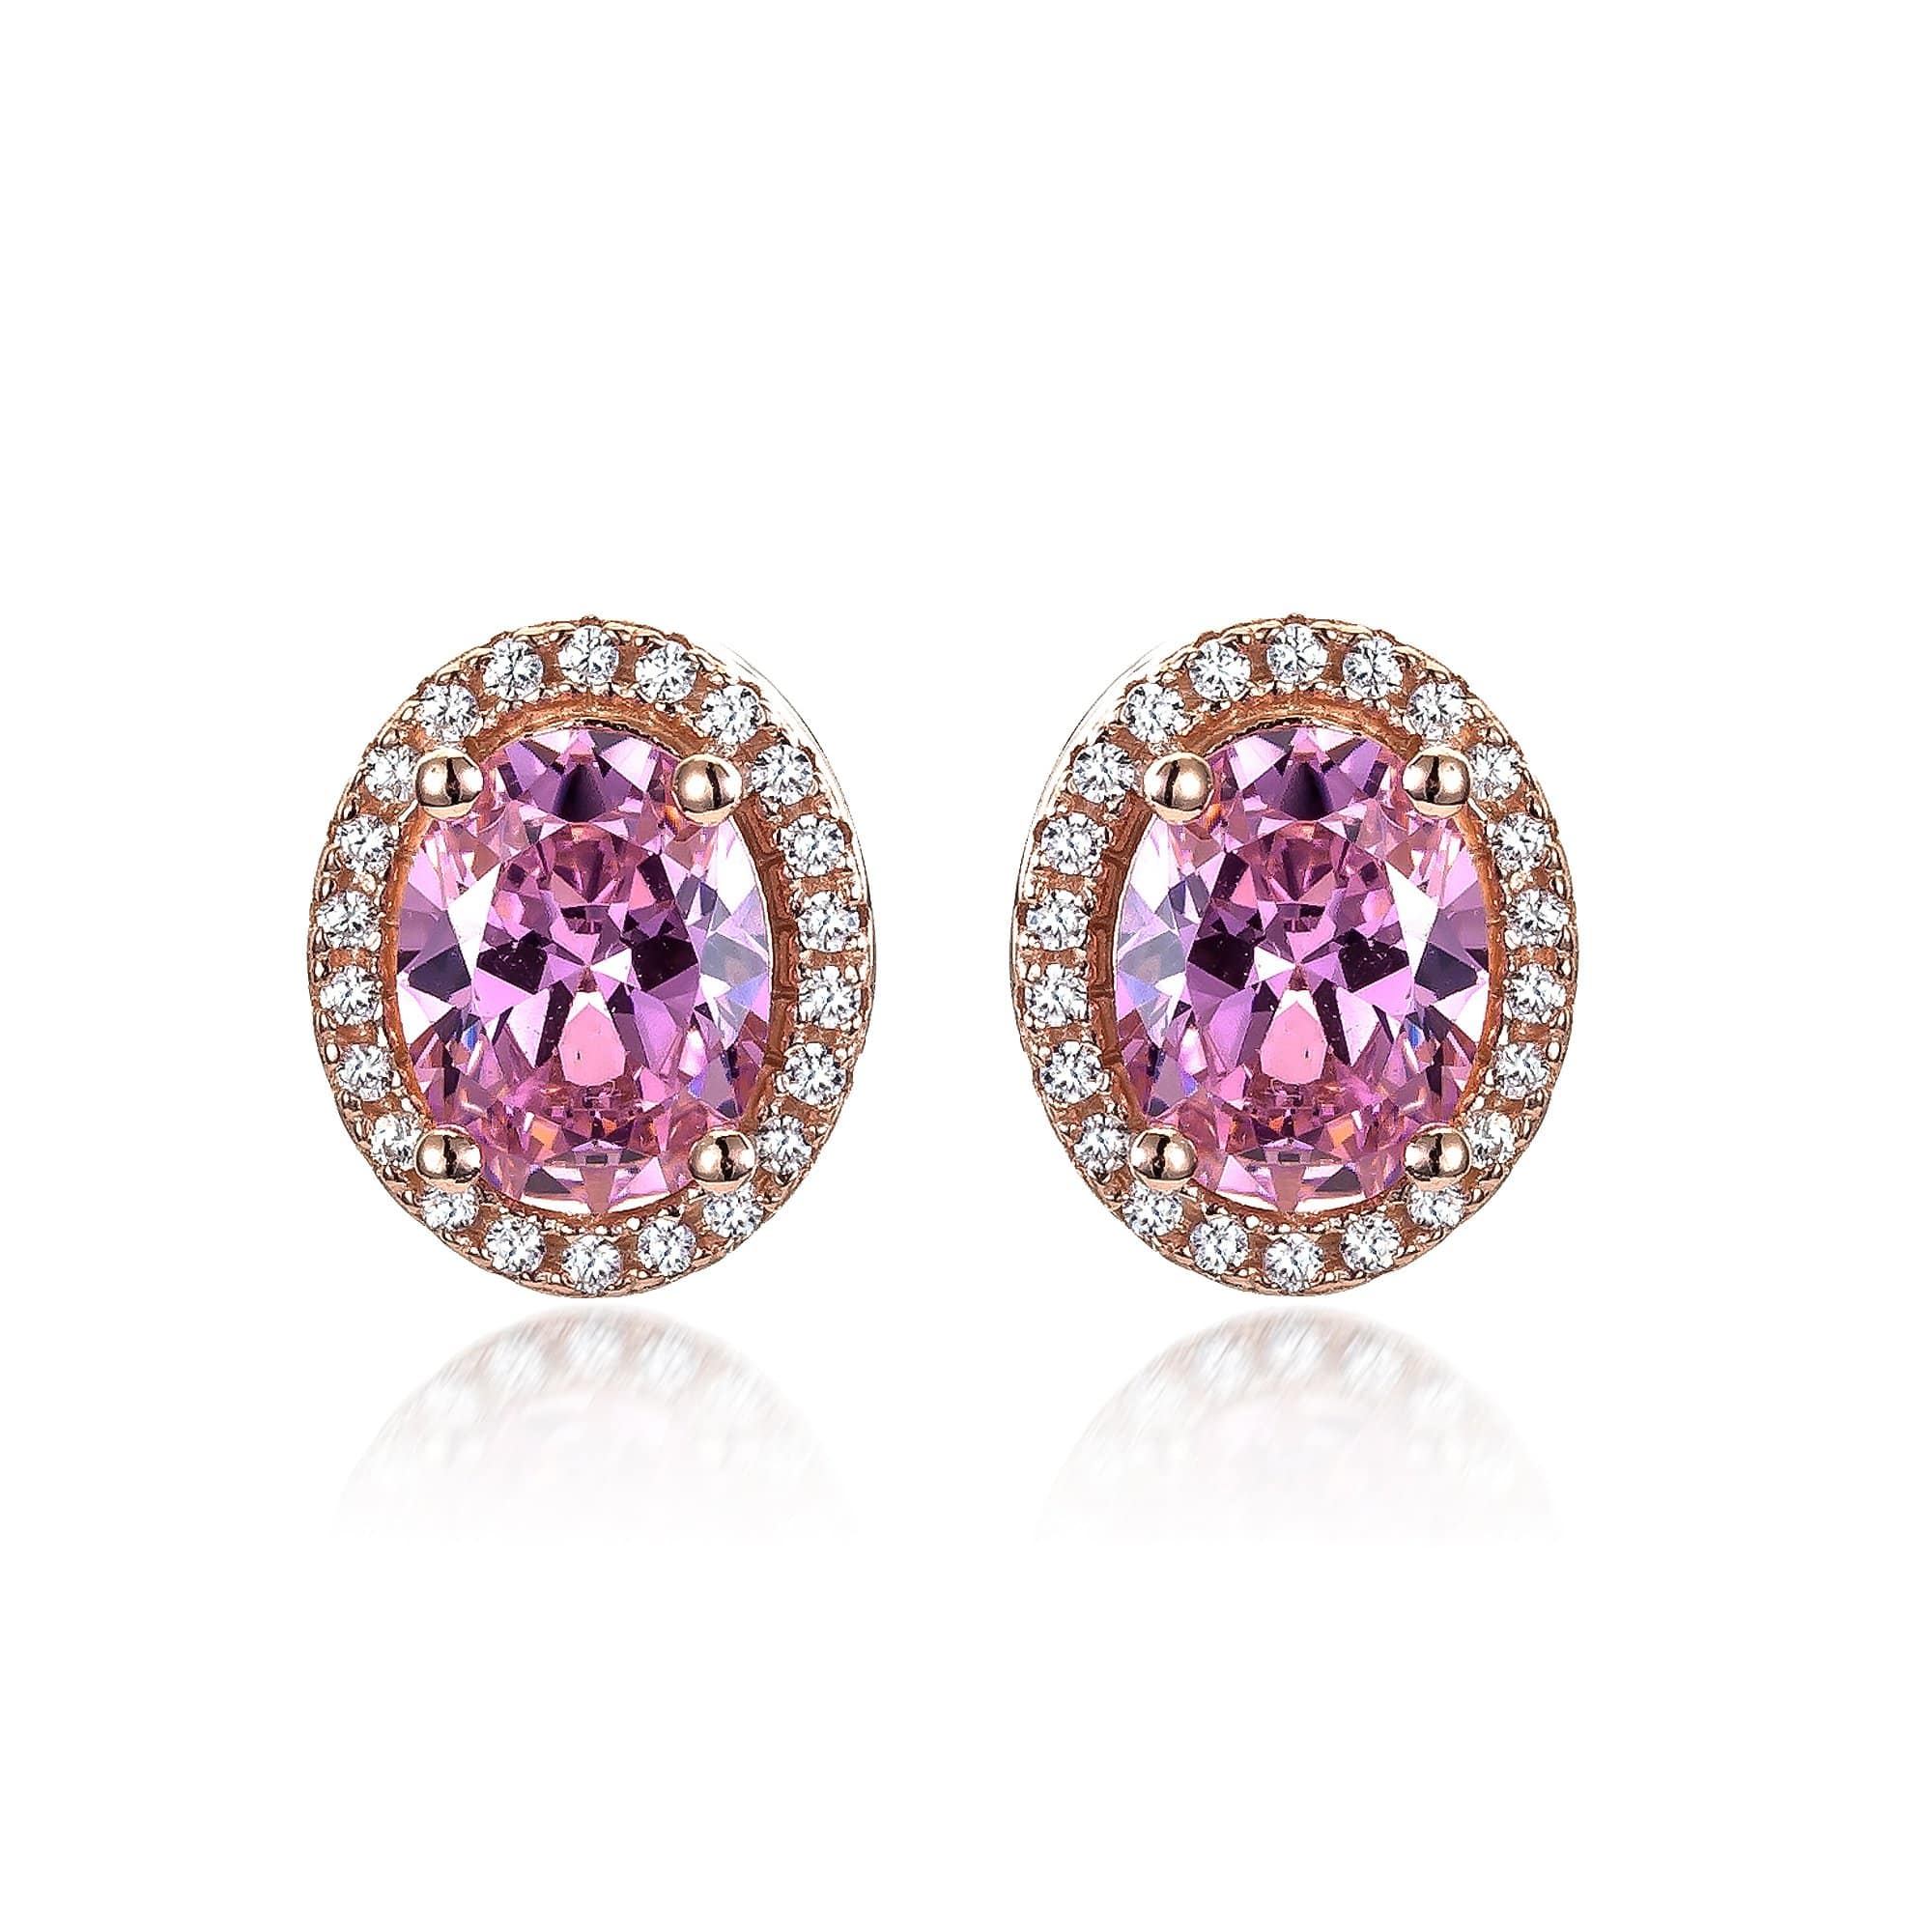 Lynora Jewellery Earring Rose Gold Plate / Pink Tourmaline Opulence Pink Tourmaline Pave Earrings Rose Gold Plate